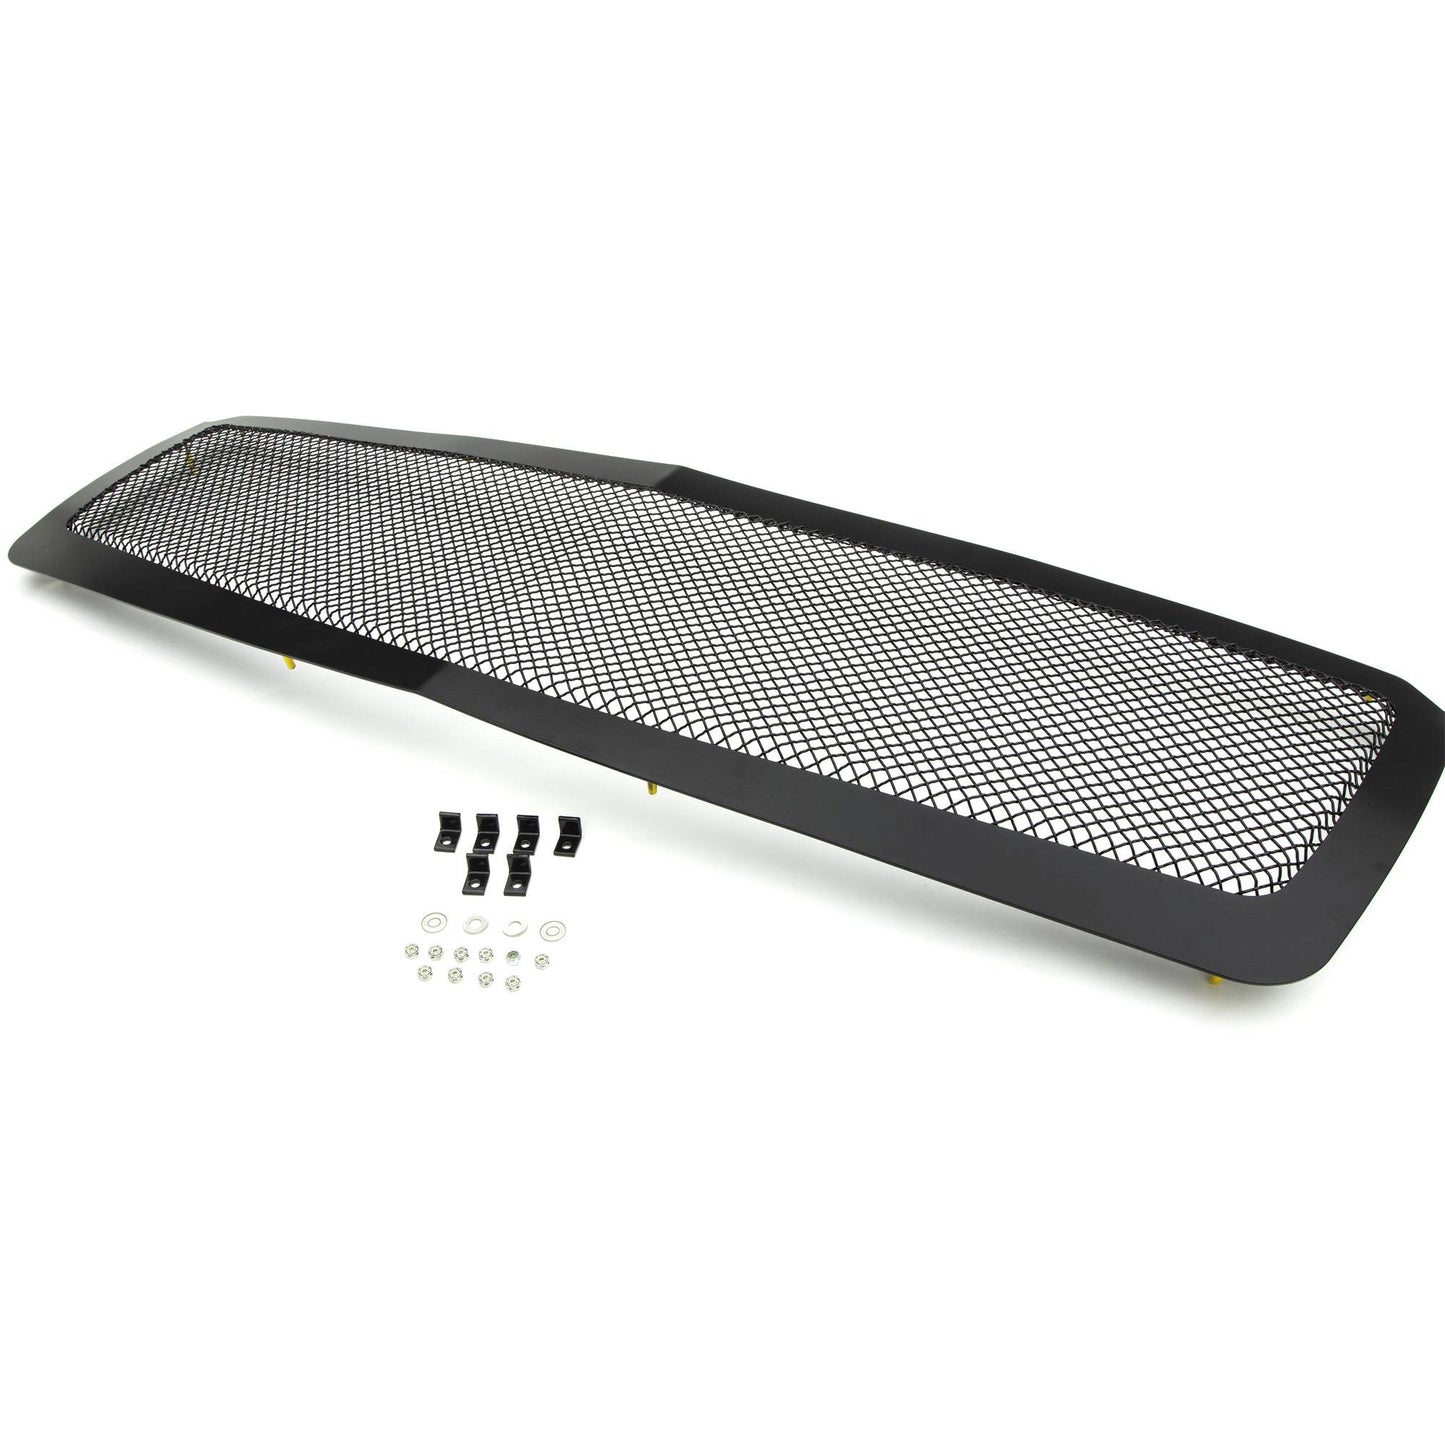 T-REX Grilles 51052 Black Mild Steel Small Mesh Grille Fits 2007-2013 Chevrolet Avalanche